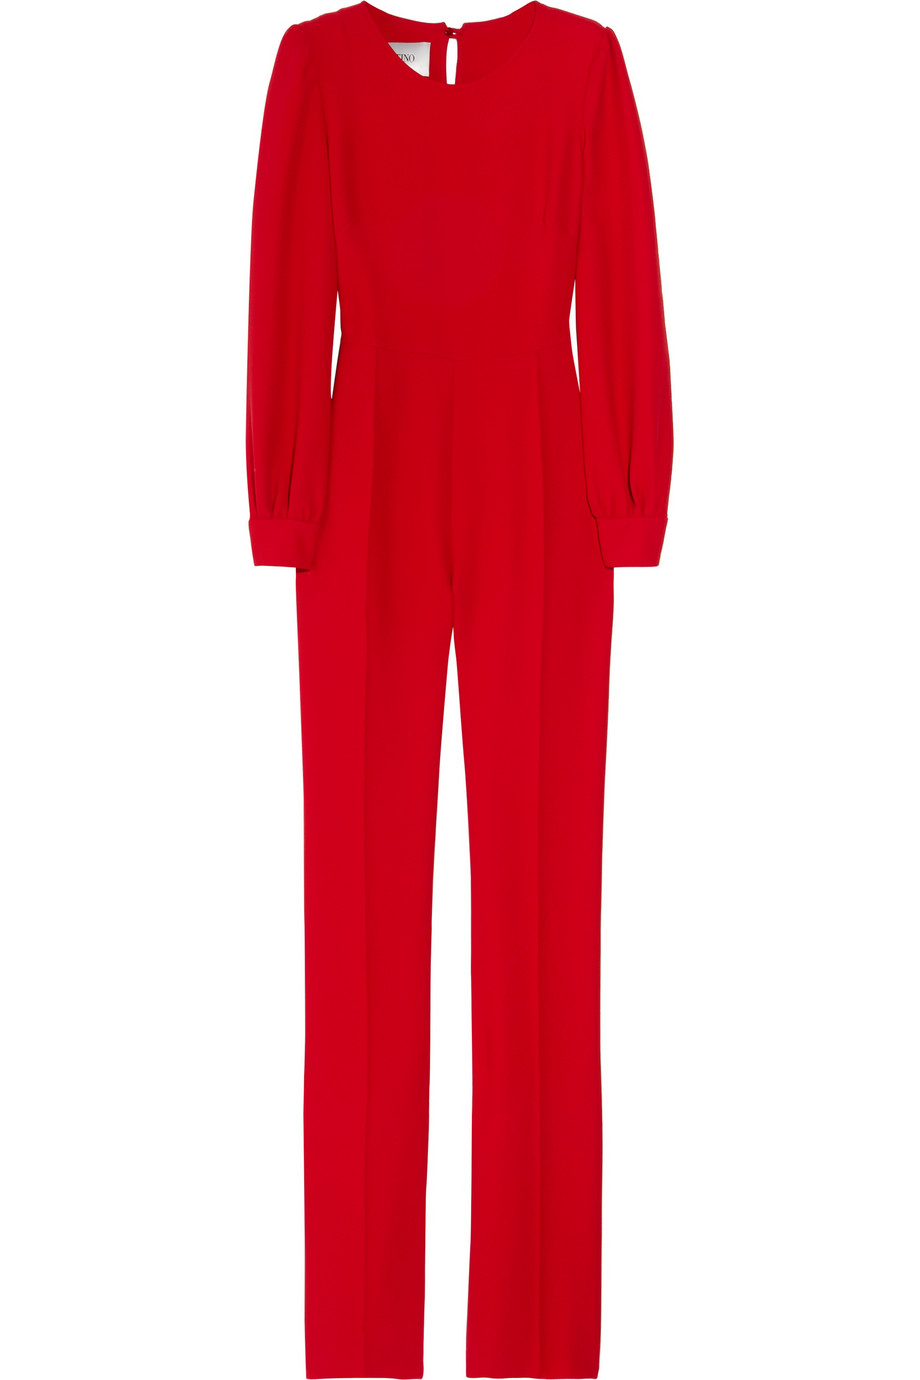 Valentino Silkcrepe Jumpsuit in Red | Lyst